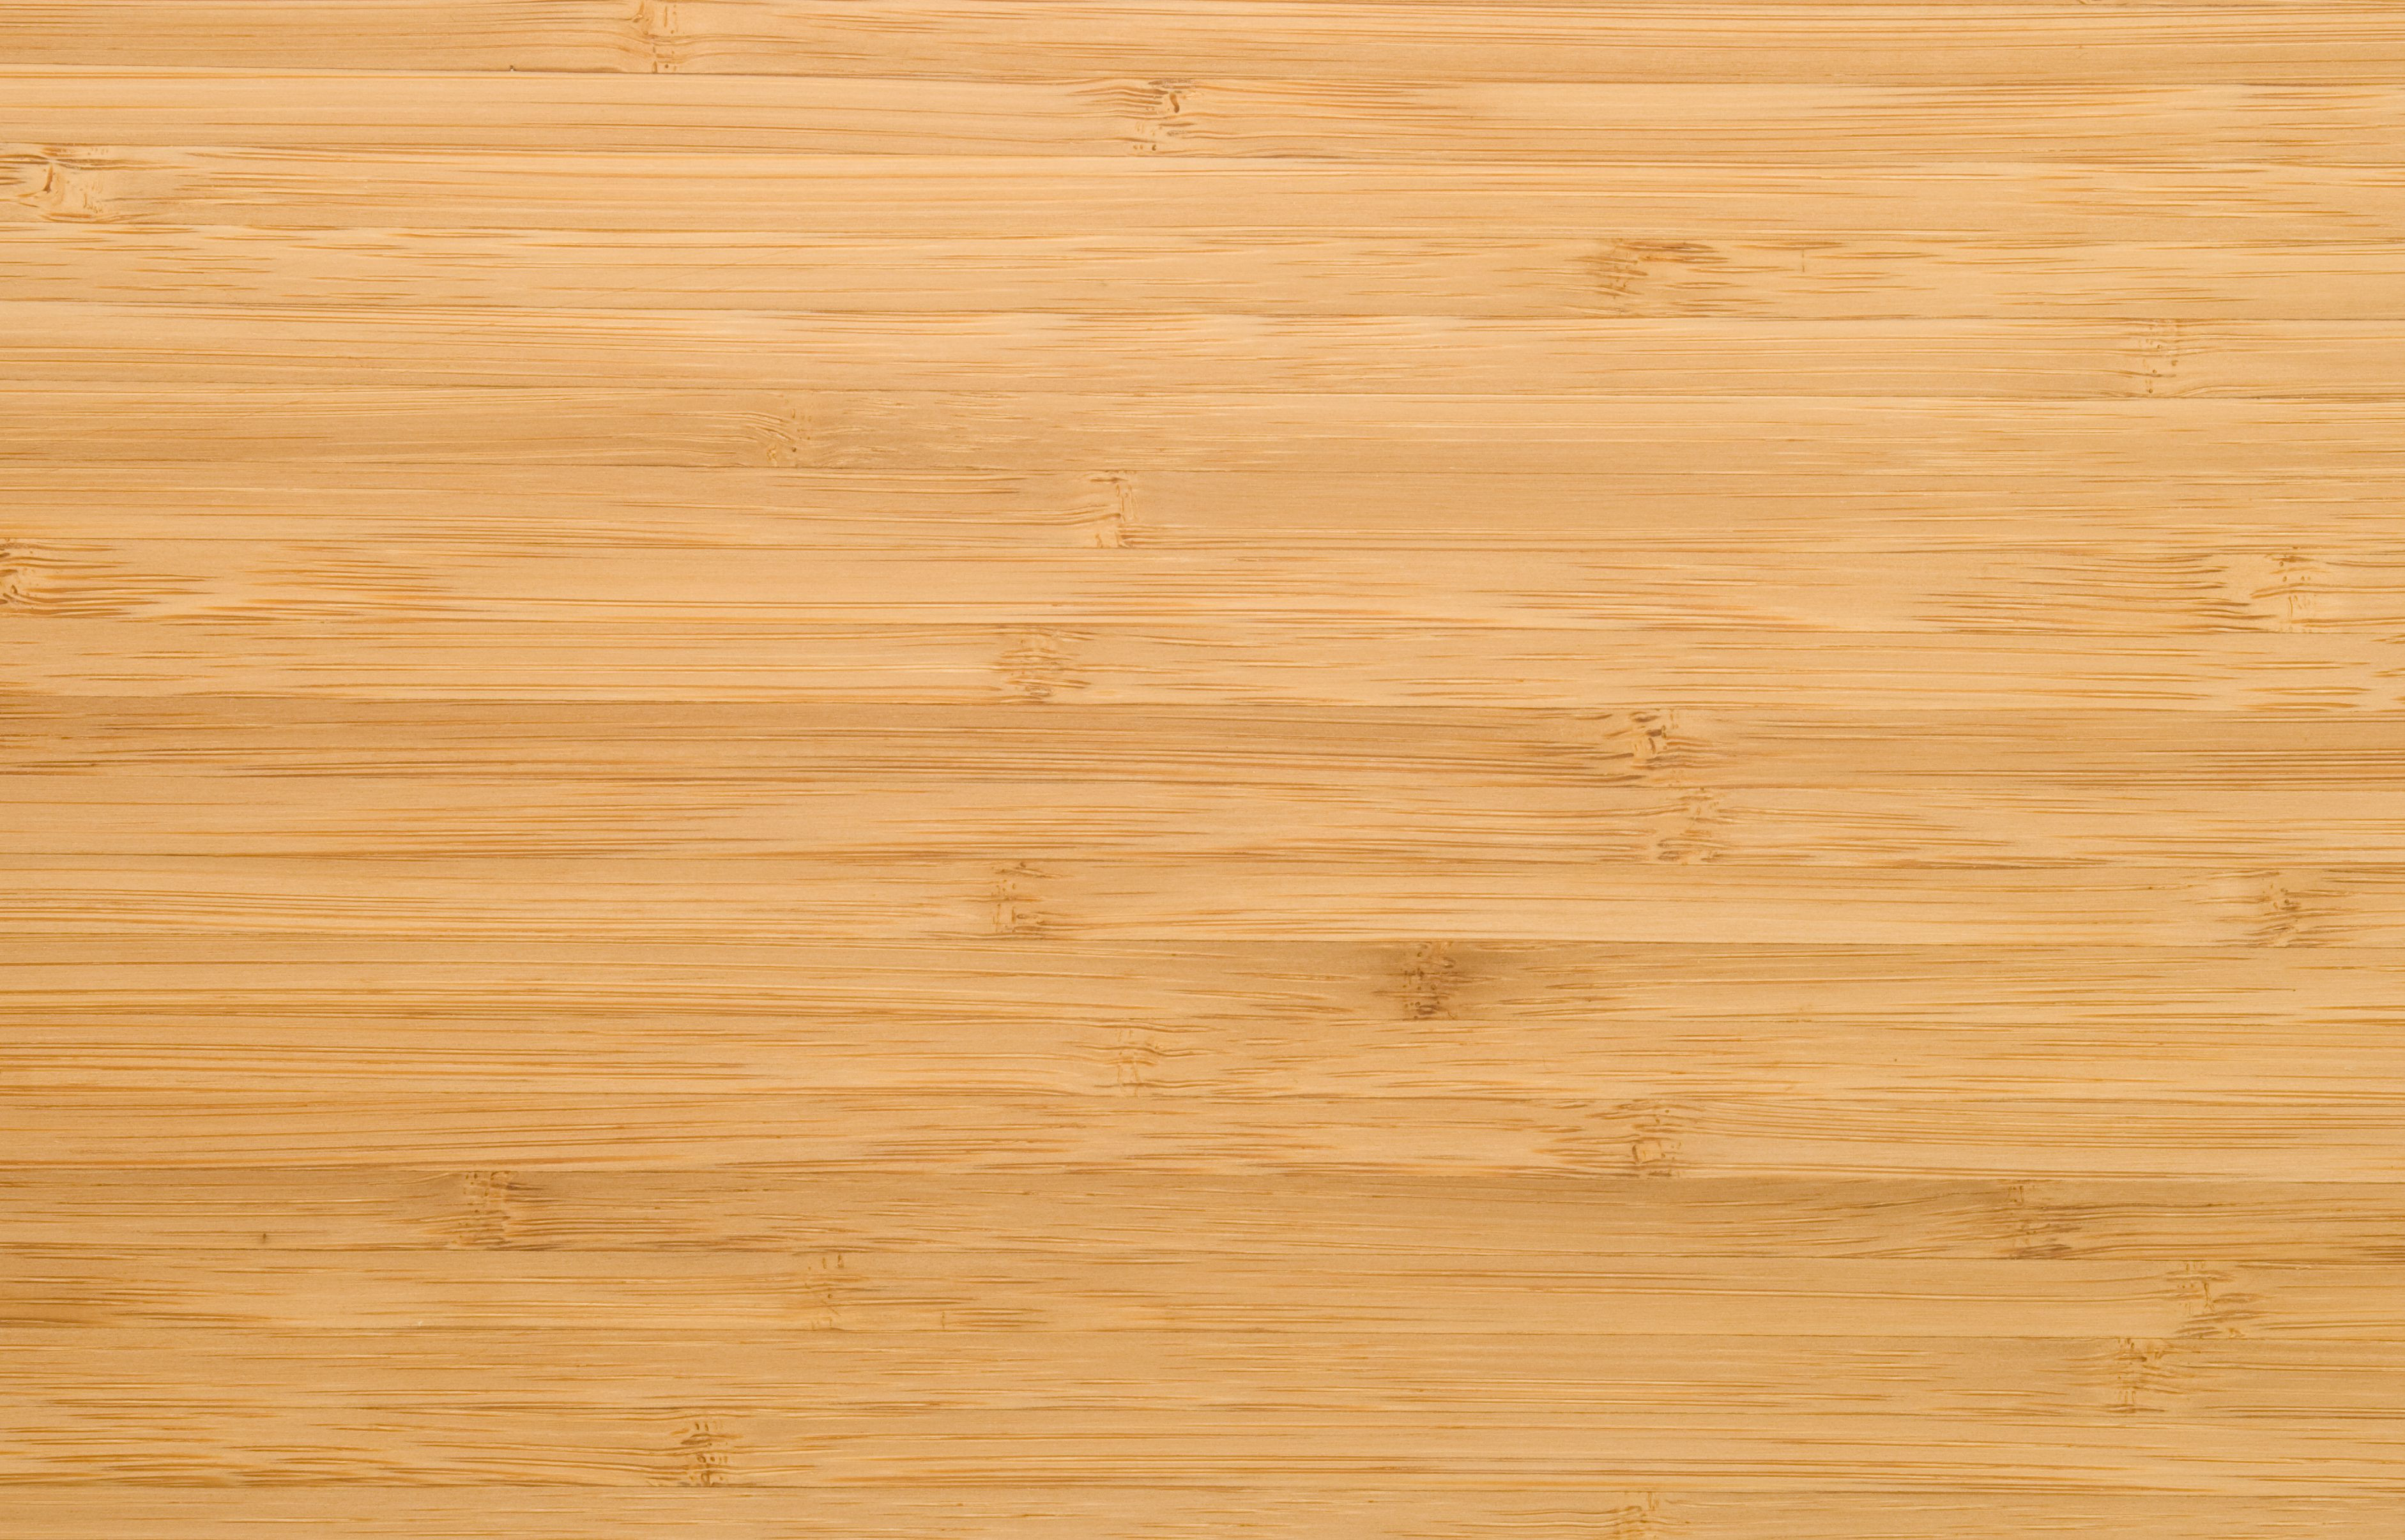 24 Perfect Clean and Wax Hardwood Floors 2024 free download clean and wax hardwood floors of can you use a wet mop on bamboo floors within natural bamboo plank 94259870 59aeefd4519de20010d5c648